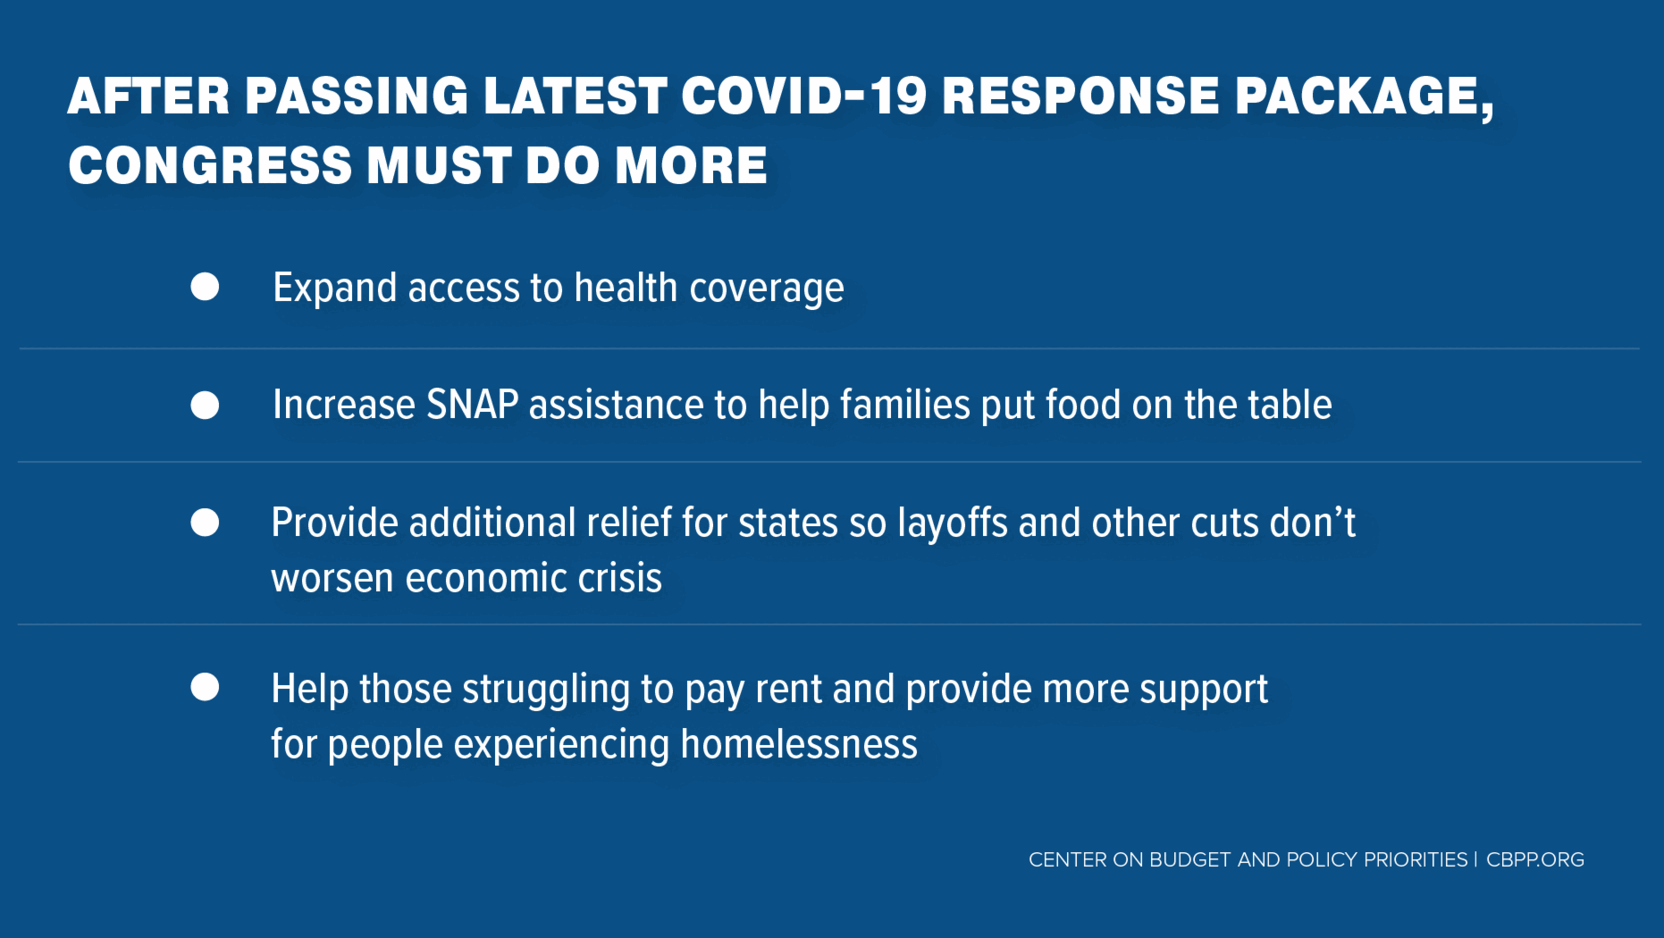 After Passing Latest COVID-19 Response Package, Congress Must Do More